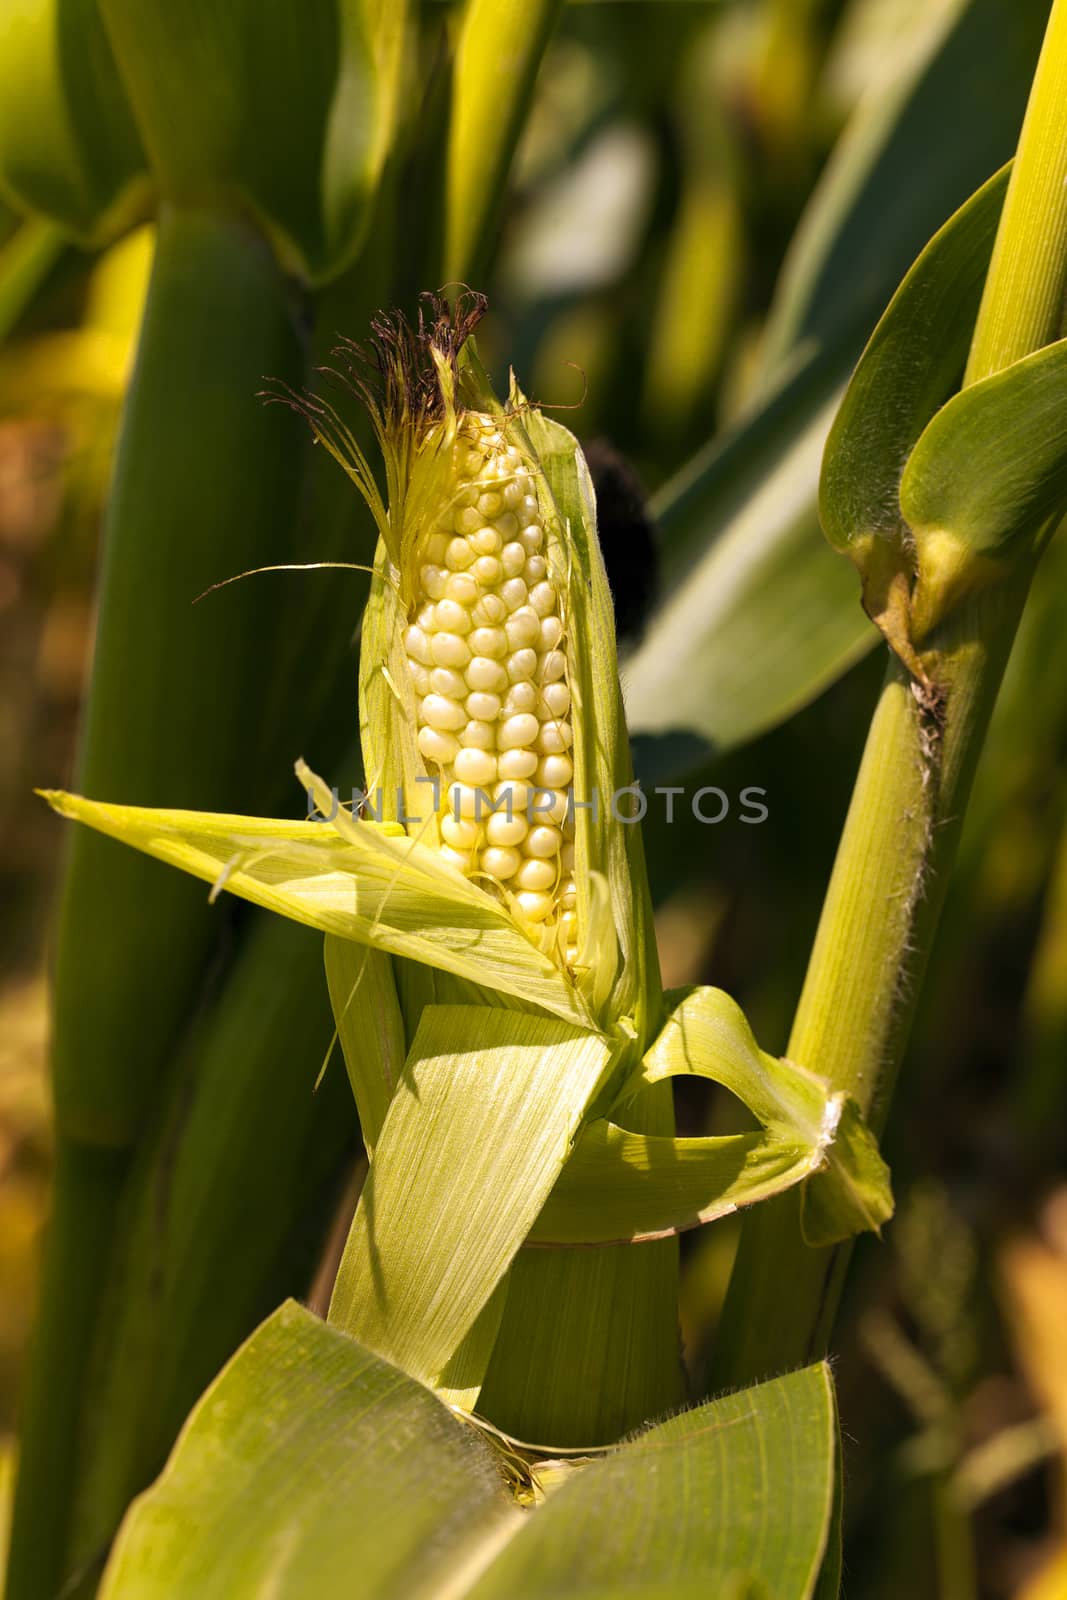  opened still not ripened a corn shoot with unripe grains of corn